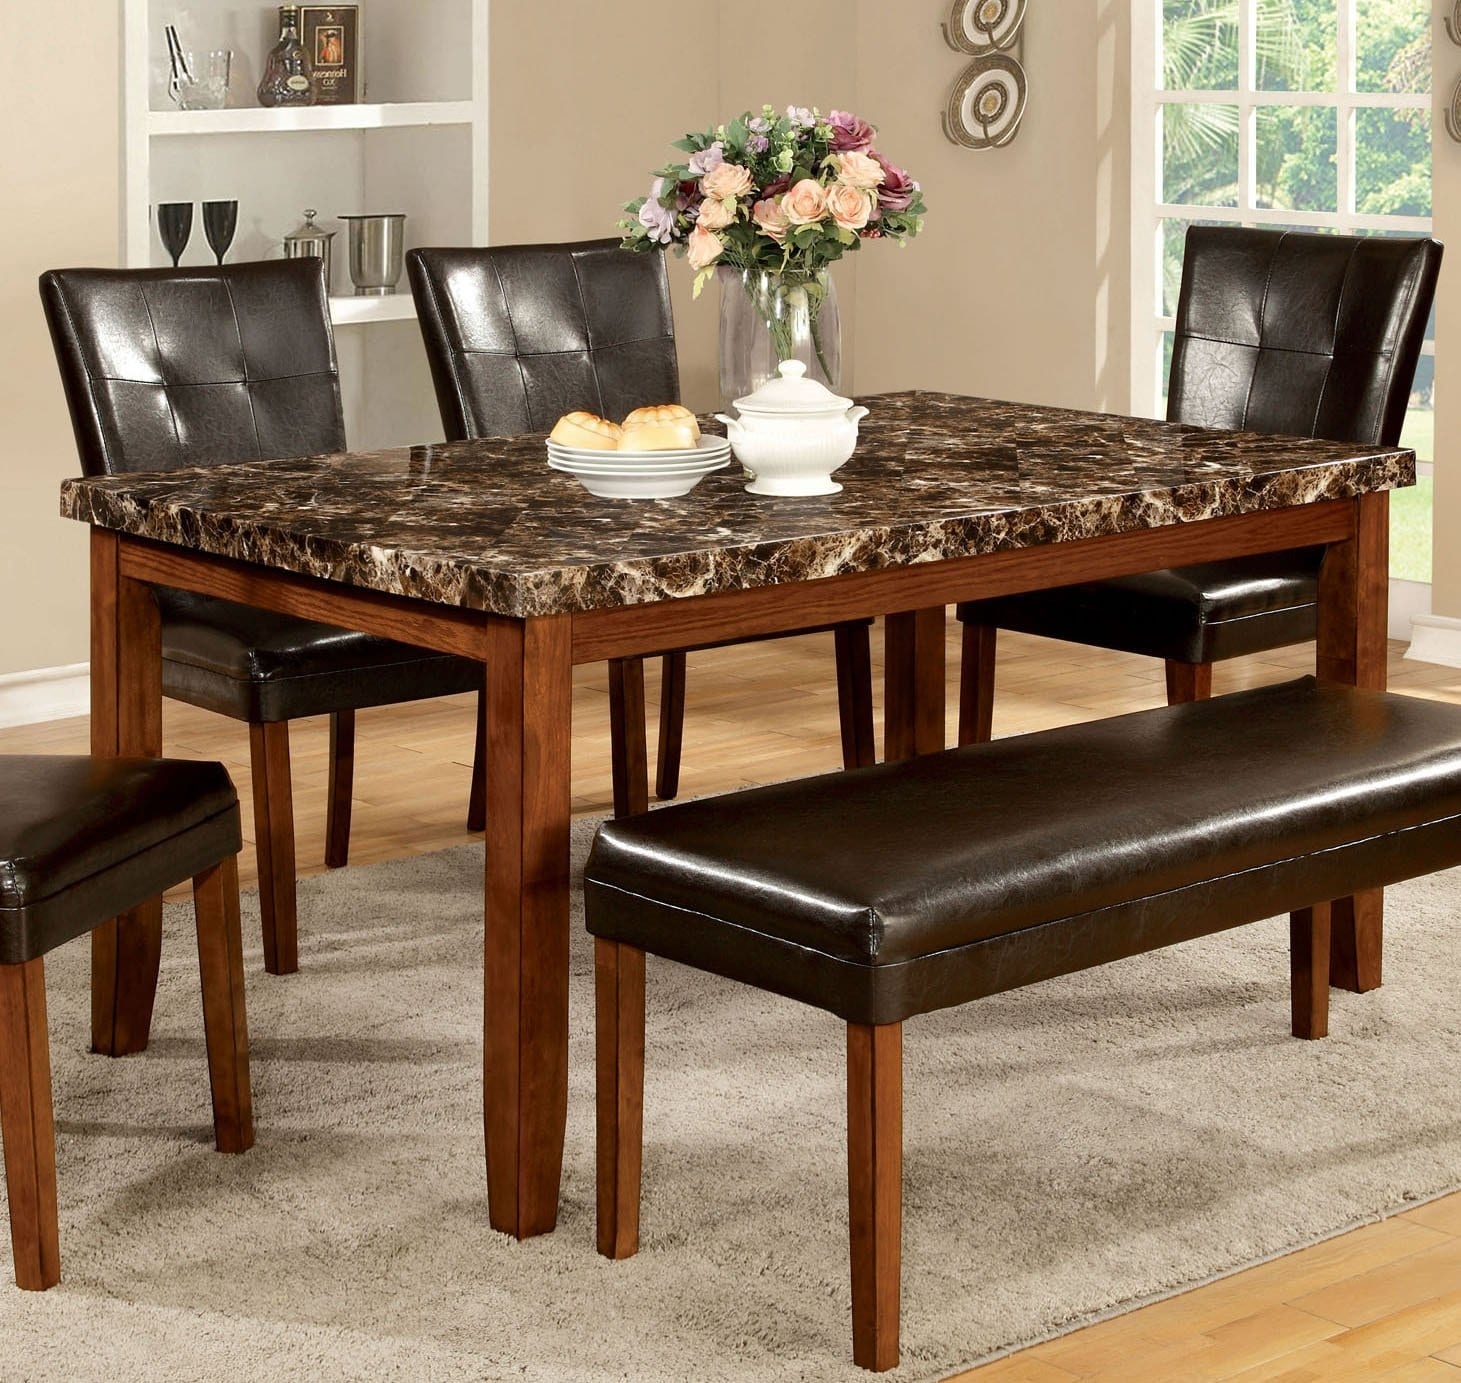 Granite Top Dining Table Visualhunt, Granite Top Dining Table And Chairs